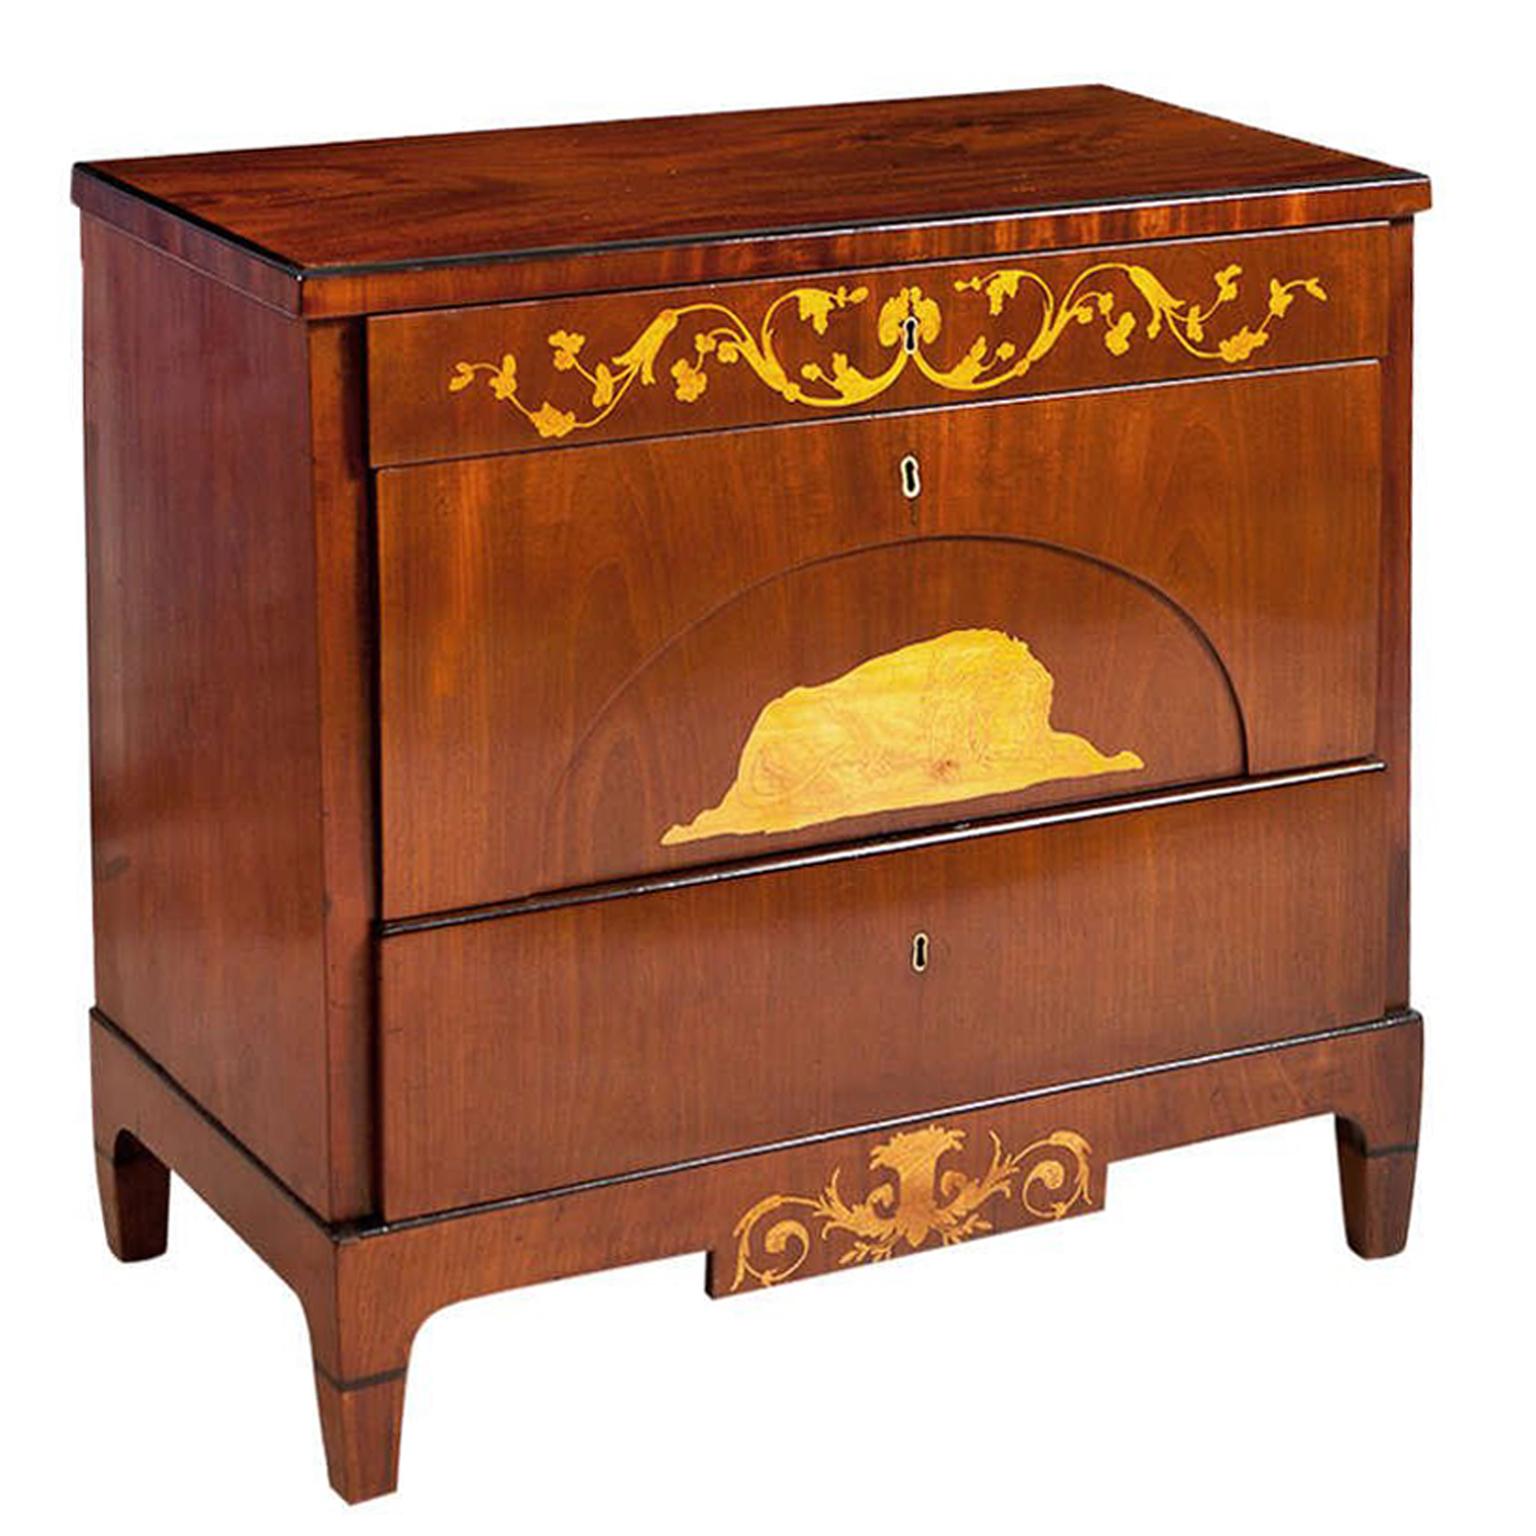 A very lovely Empire chest with three drawers in mahogany with satinwood inlays of resting lion and foliage. Denmark, circa 1815. This uniquely Danish design in regard to scale, proportion and style has a fresh and Classic feel. The inlays are